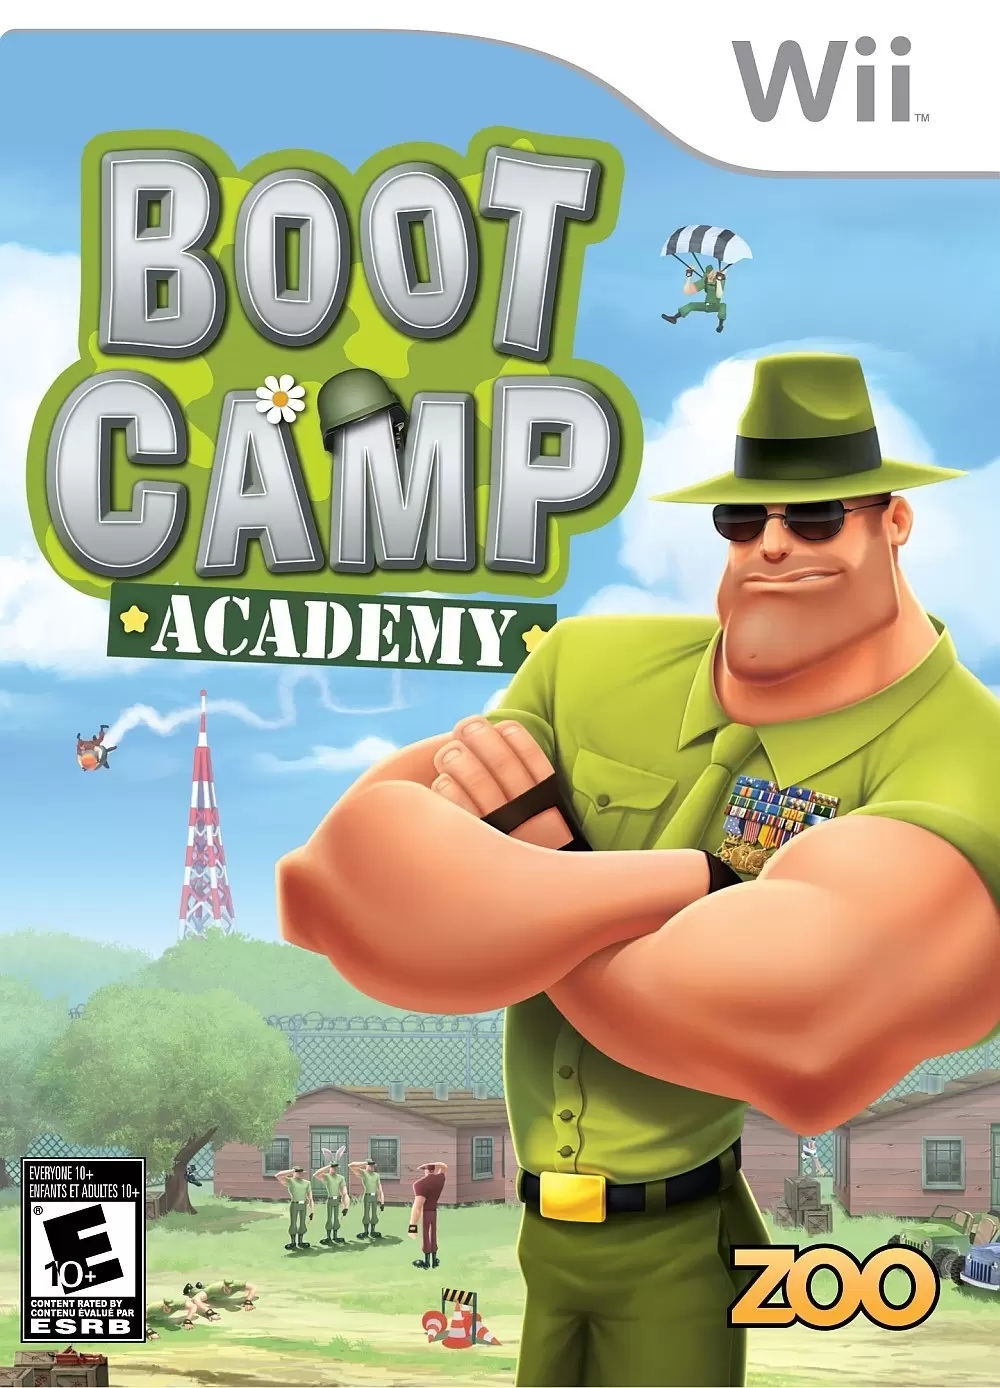 Jeux Nintendo Wii - Boot Camp Academy